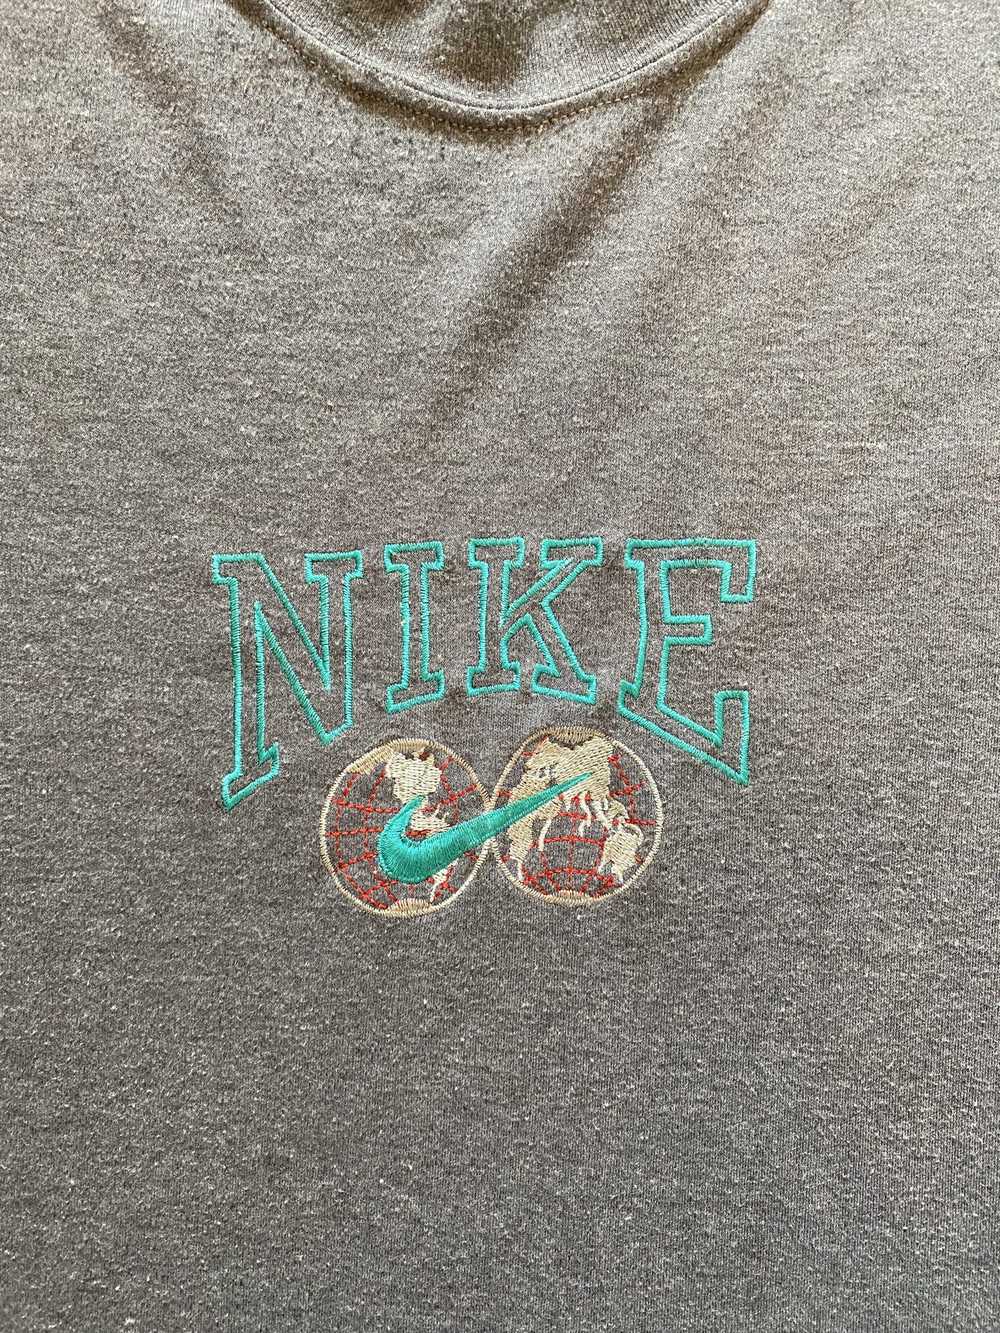 90s Embroidered Nike T-Shirt - image 2